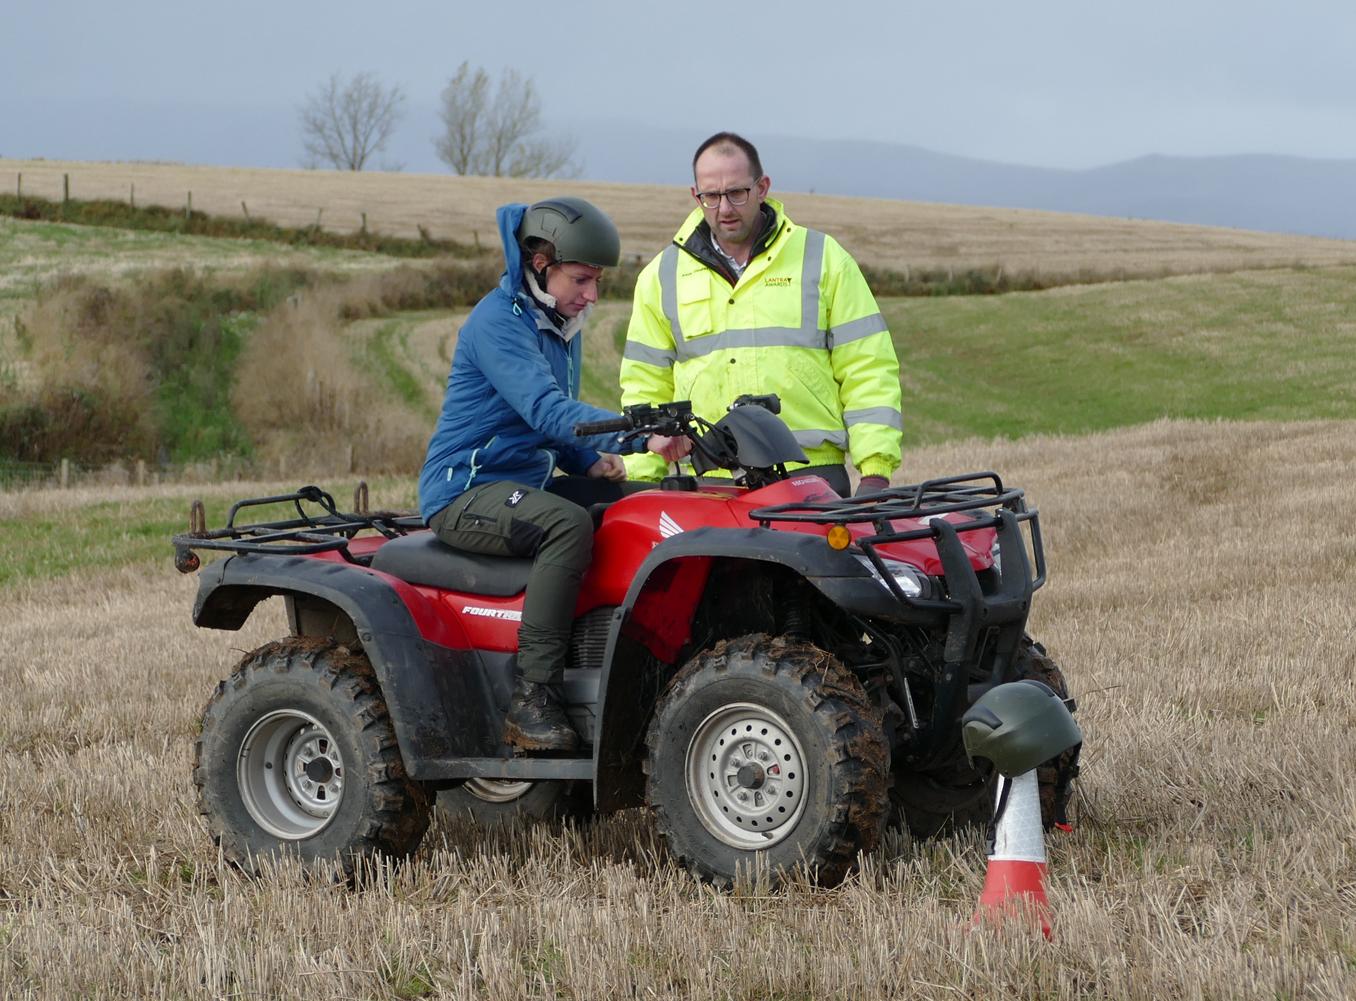 Woman on quad bike with instructor